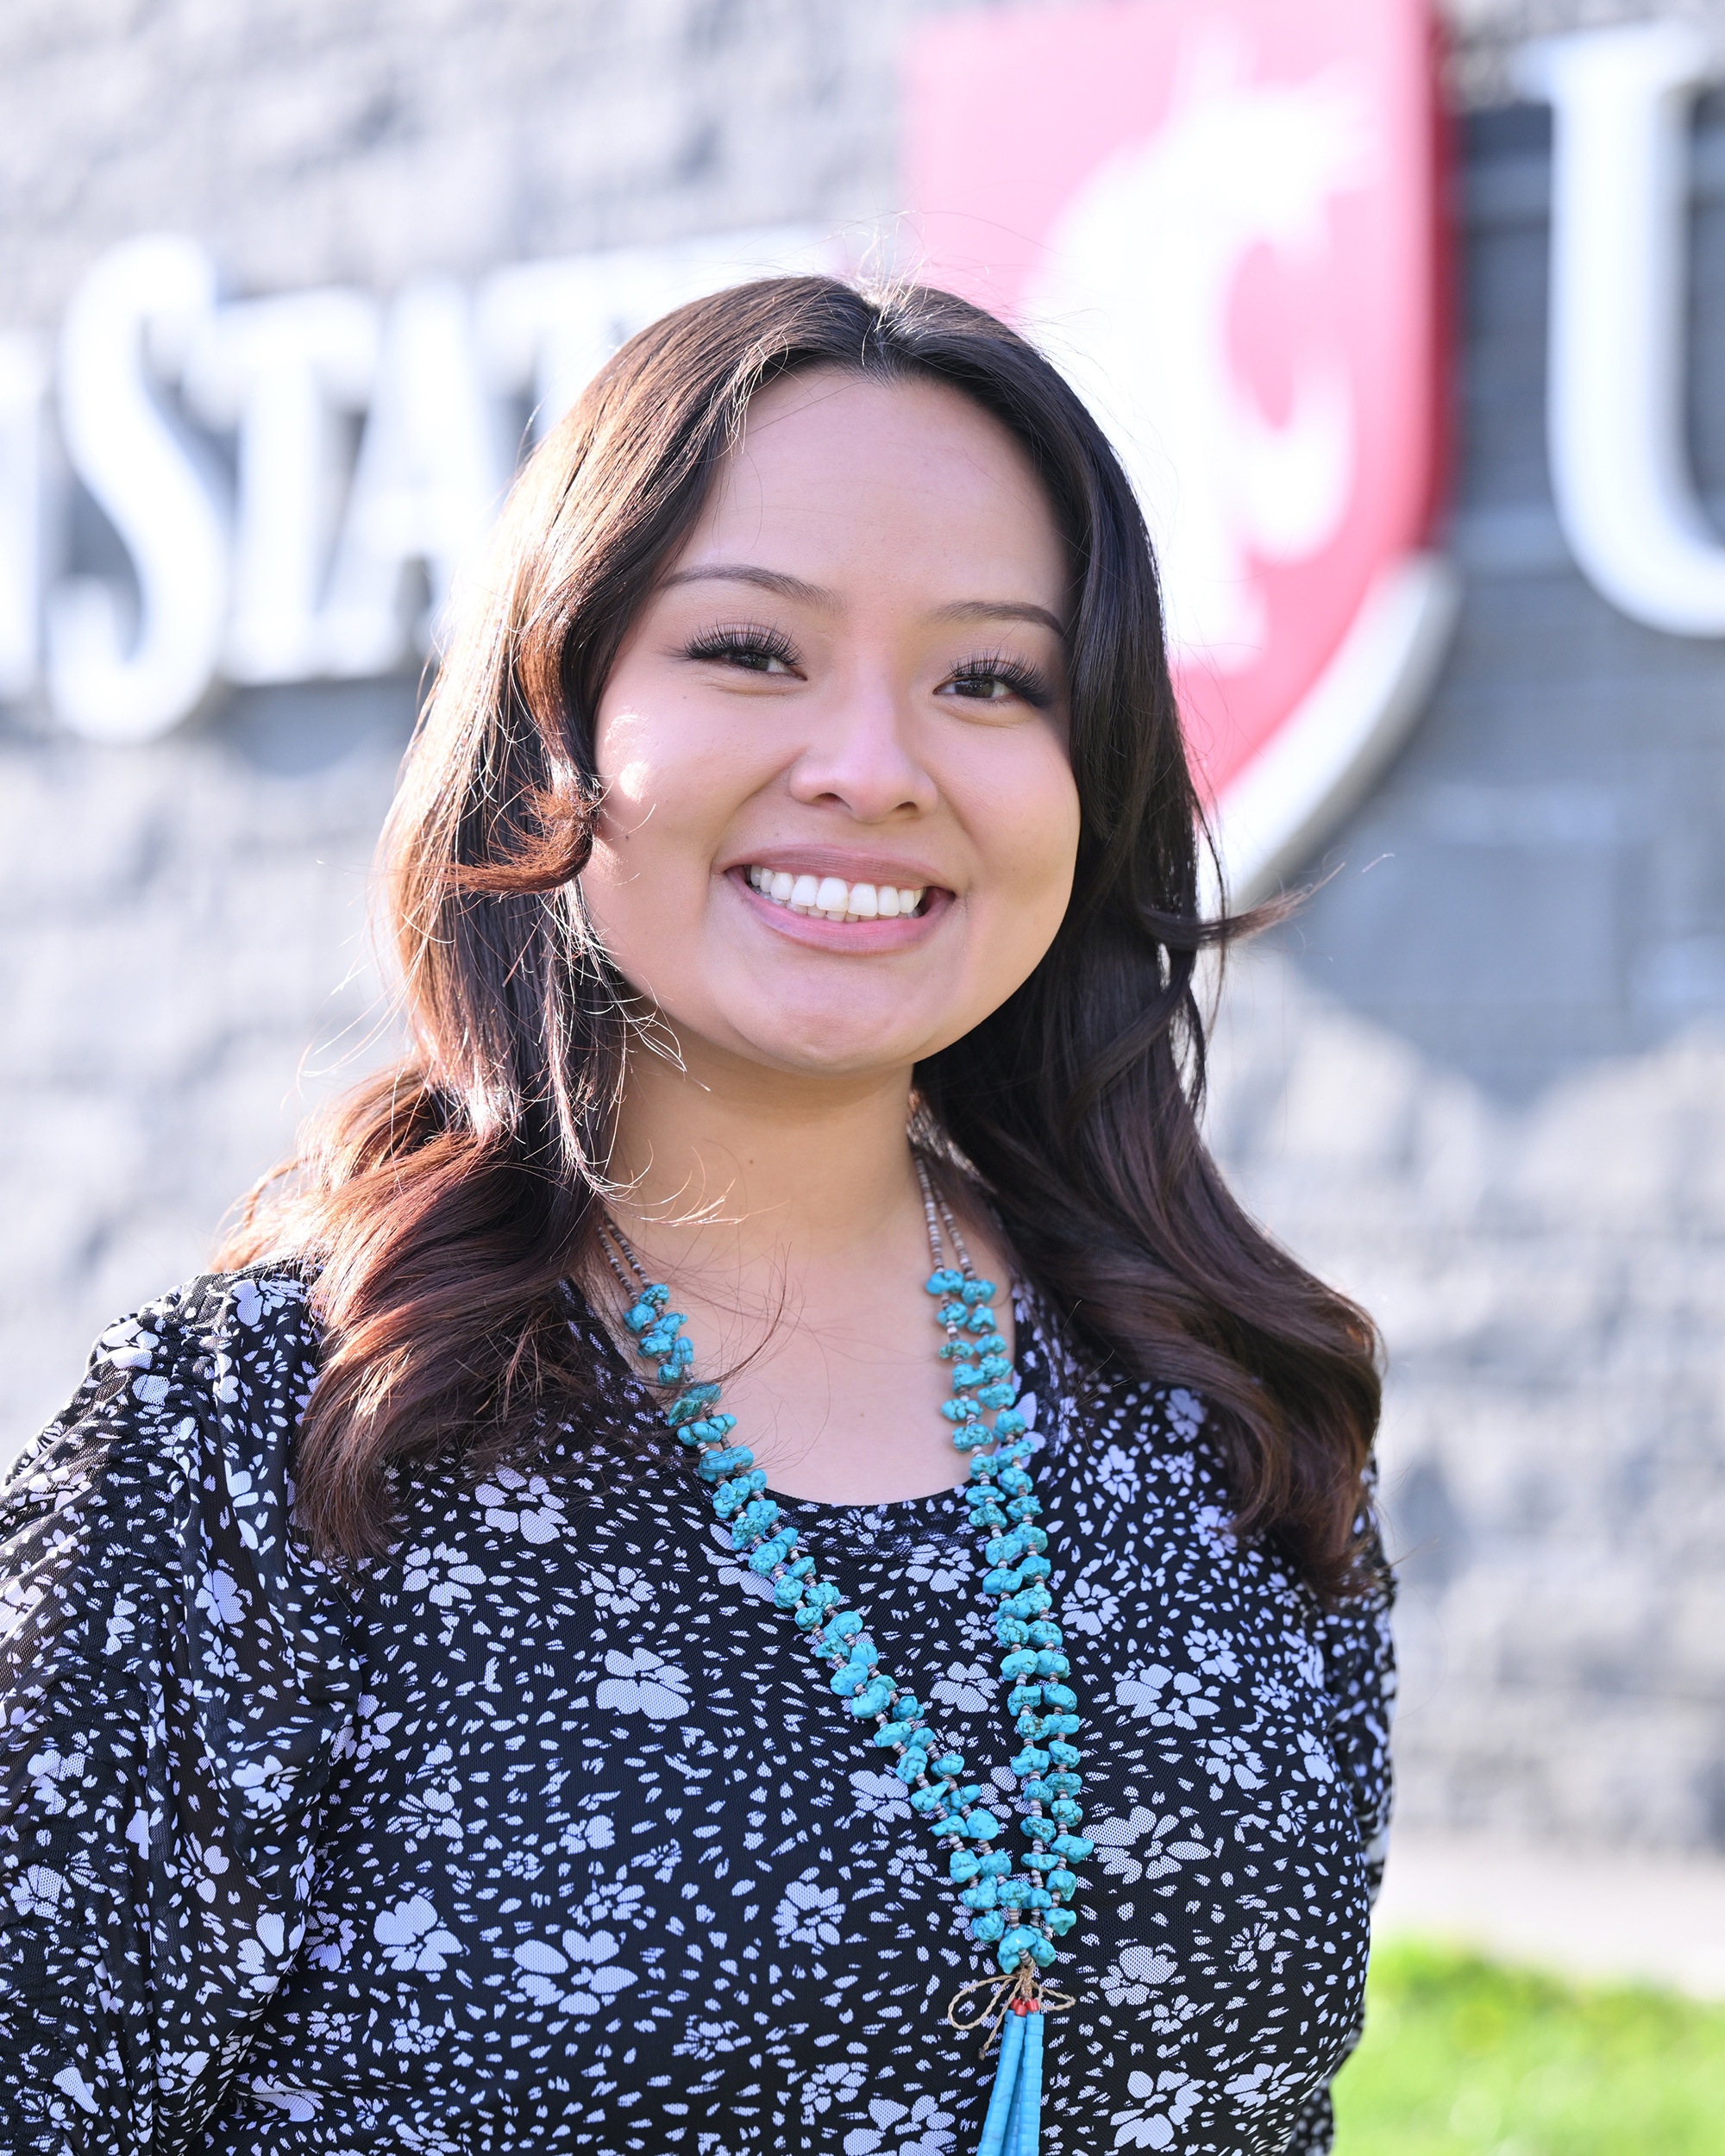 A person smiles at the camera in front of the Washington State University logo